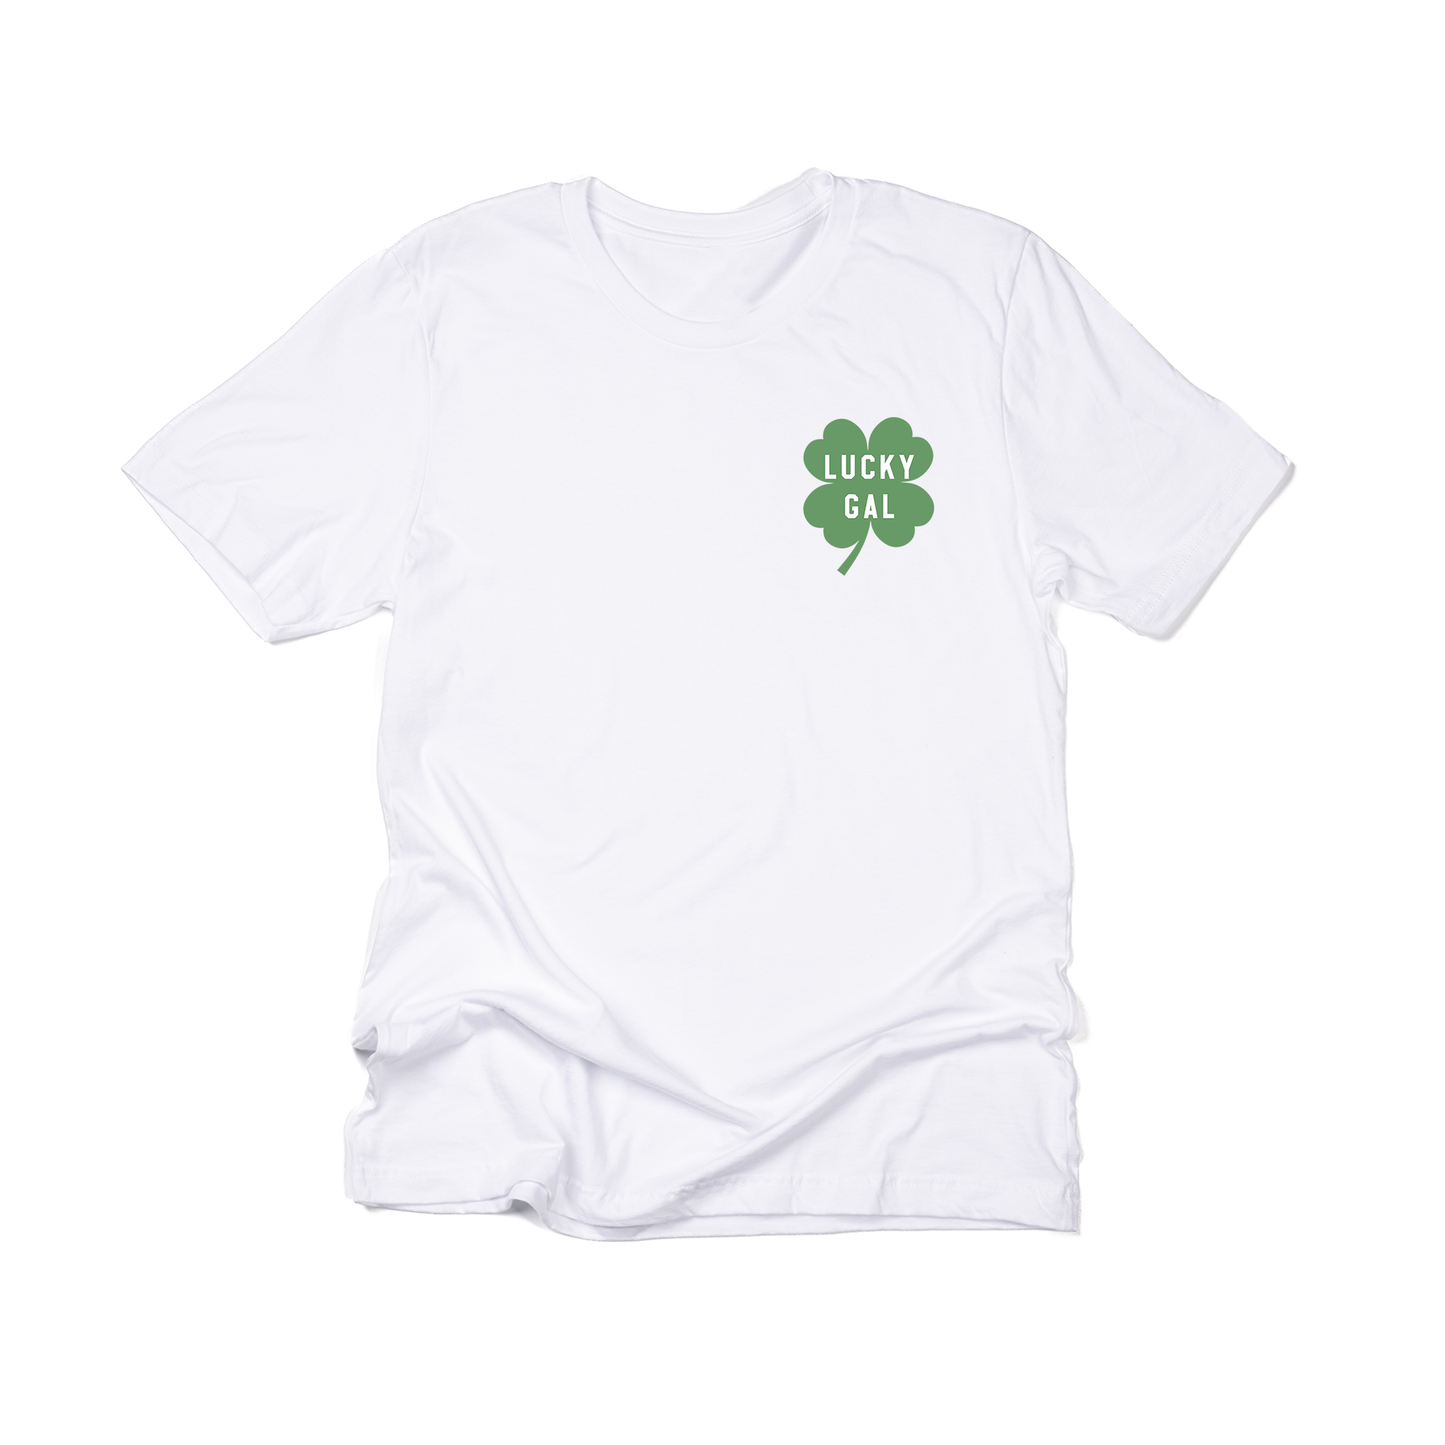 Lucky Gal (St. Patrick's,  Pocket) - Tee (White)